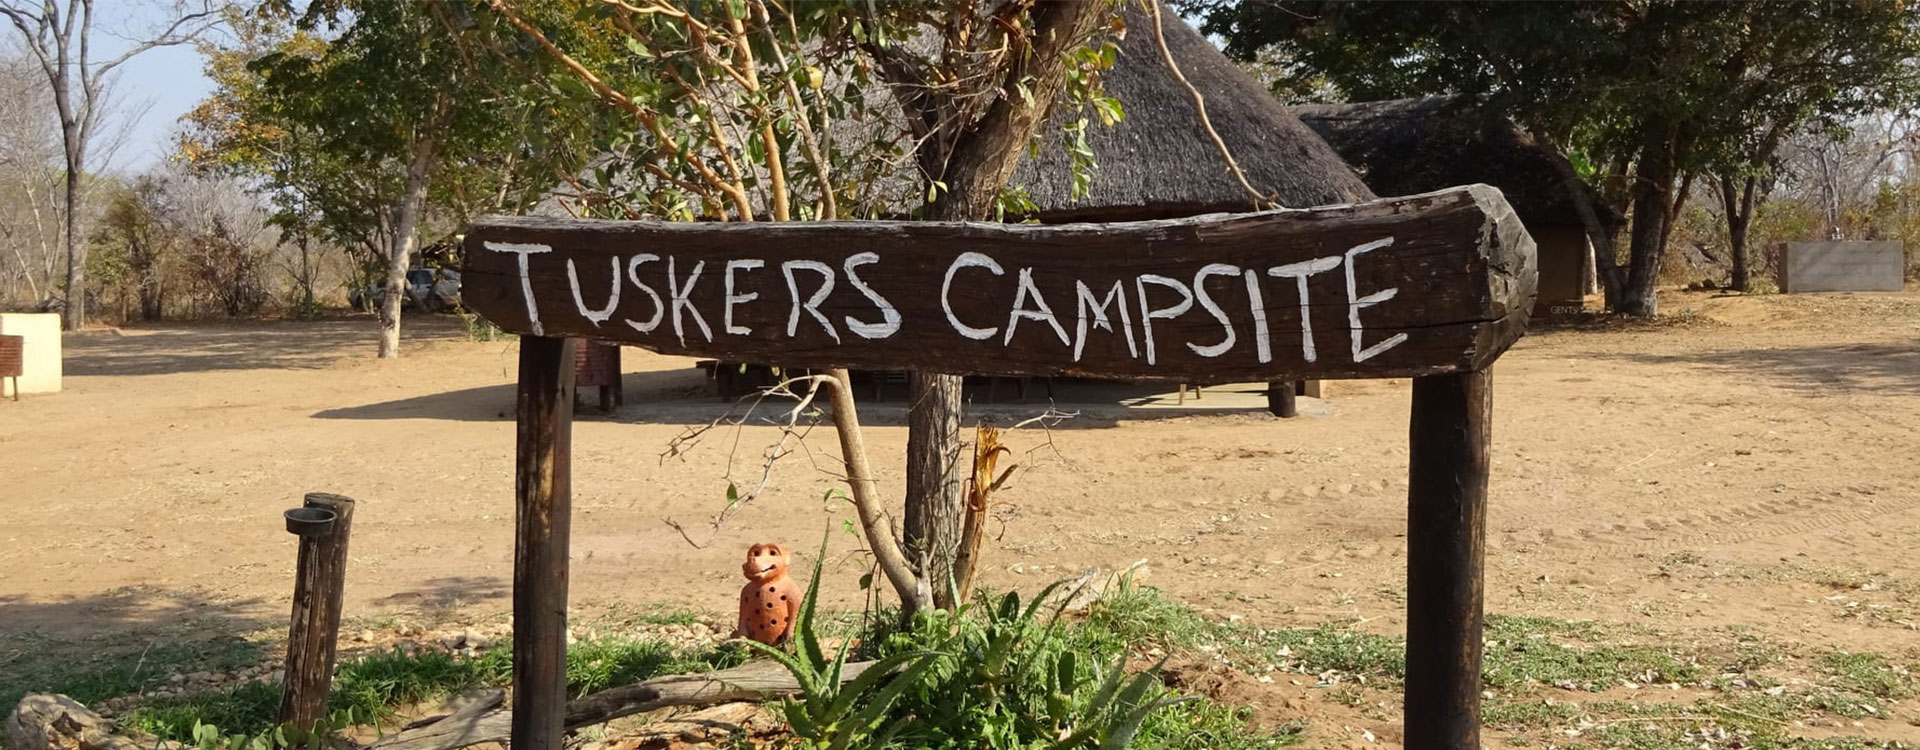 Tuskers Campsite